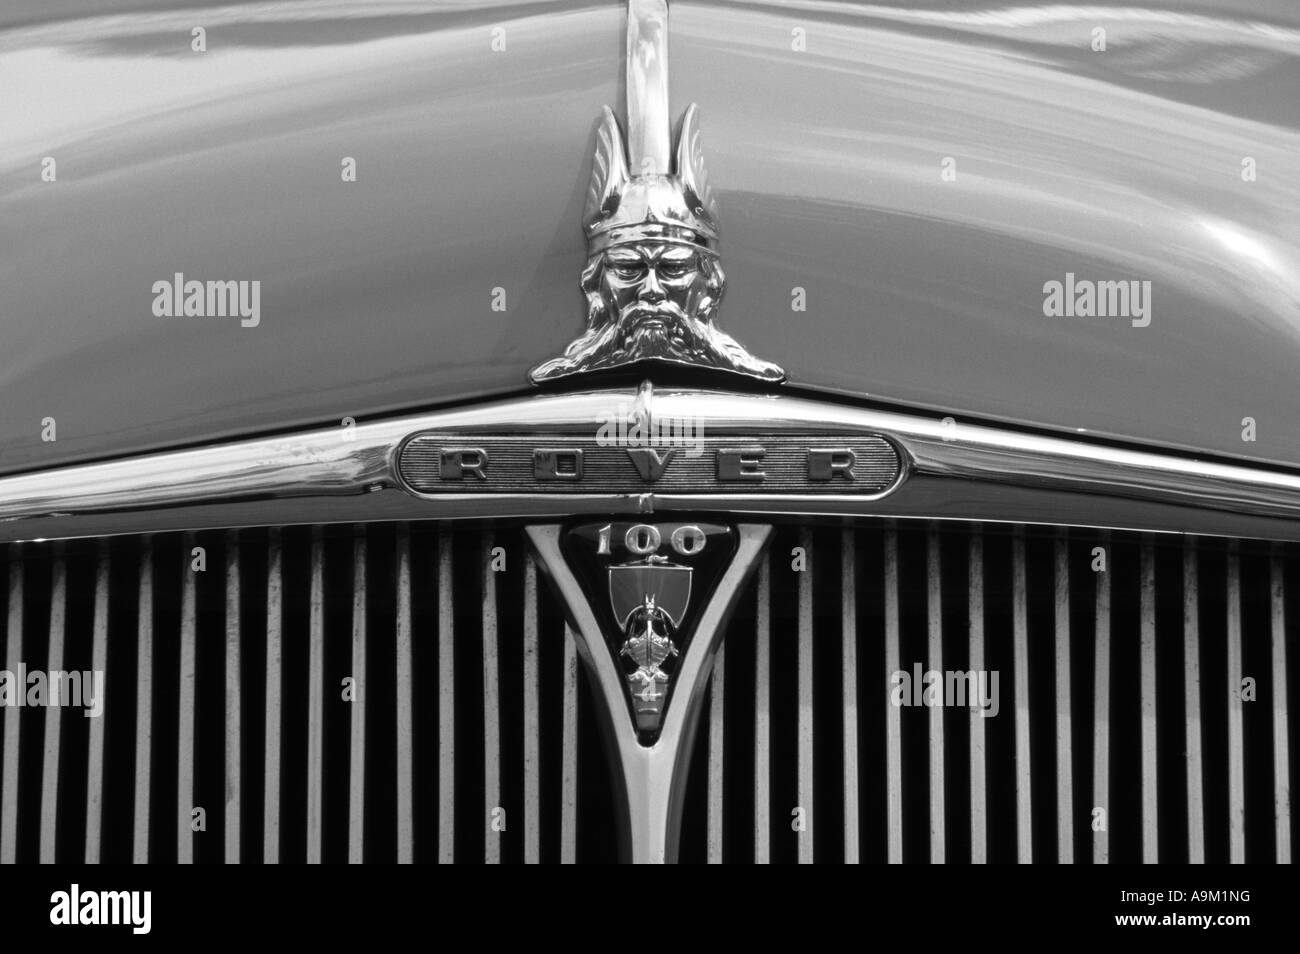 Rover 100 P4 of 1960. English car manufacturer 1904 on. Rover car auto badge marque British maker motif Stock Photo